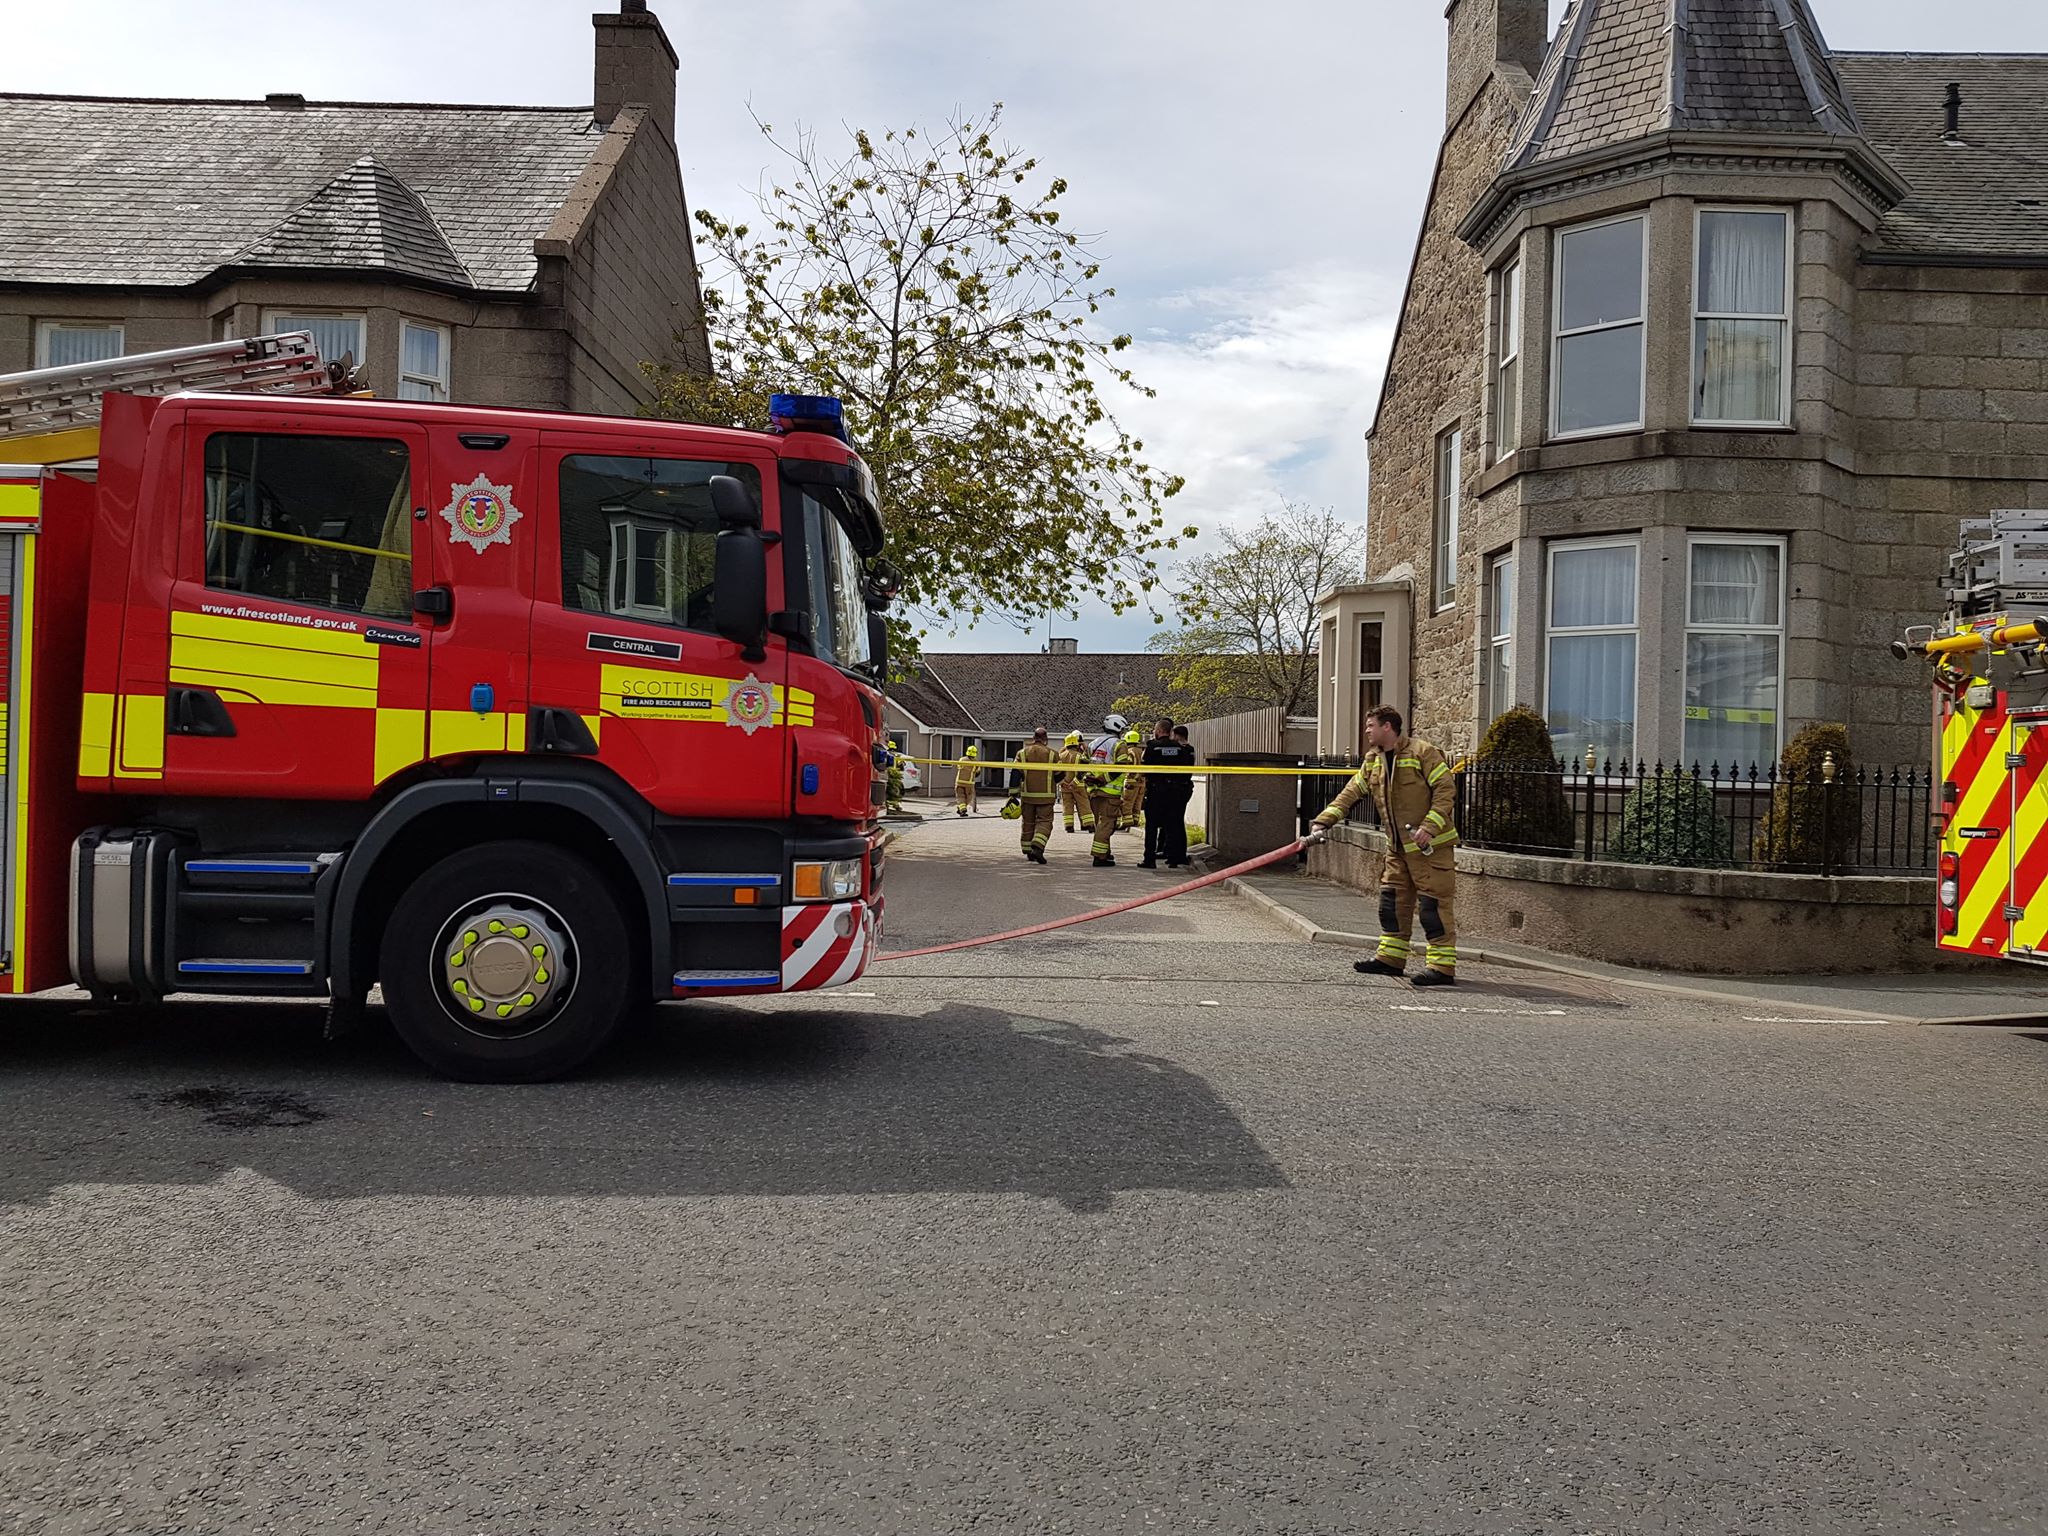 A fire engine outside the home in Ellon